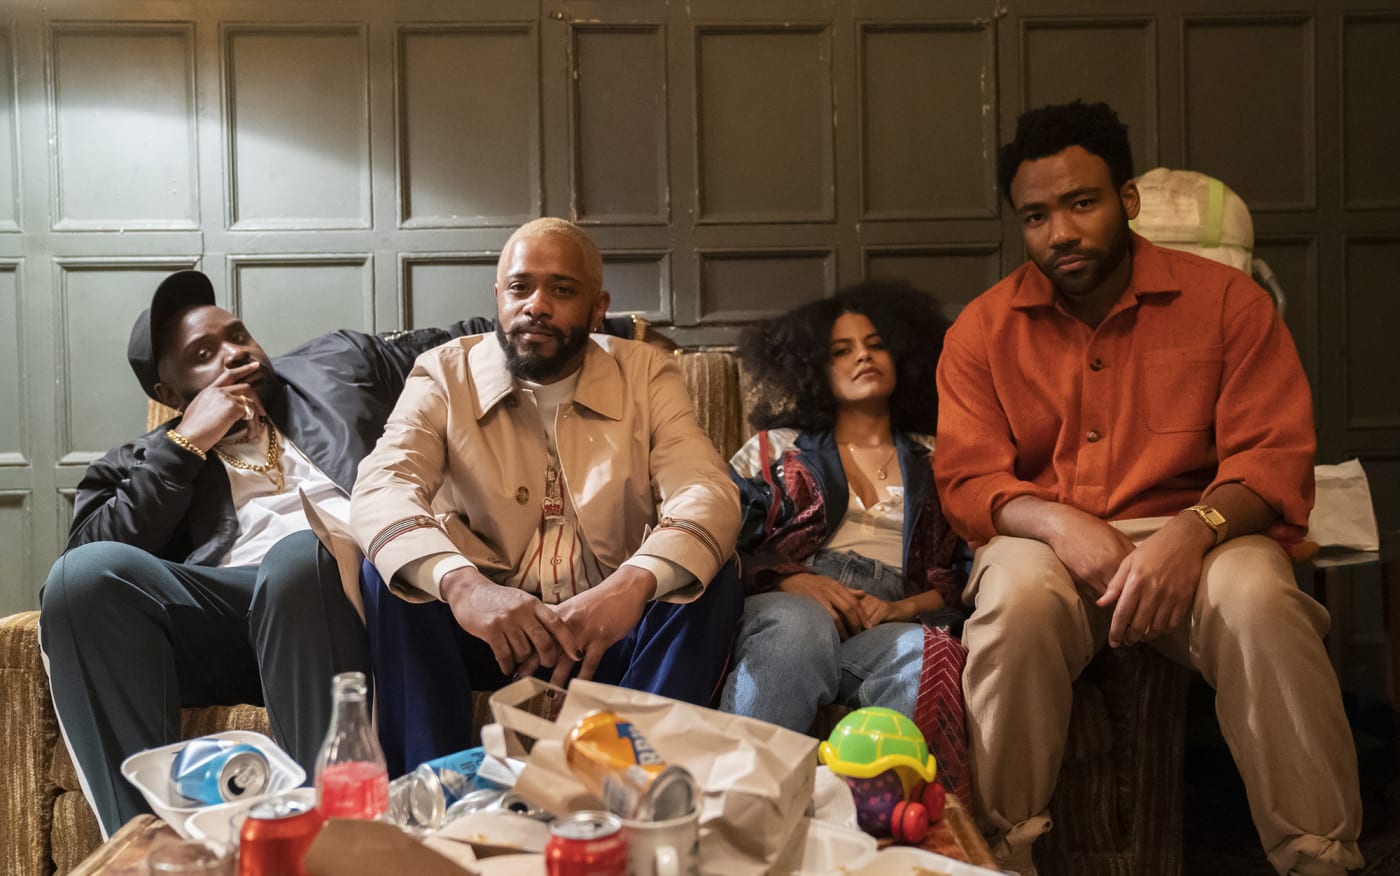 Best-bets for March 24: “Atlanta” is back and strange